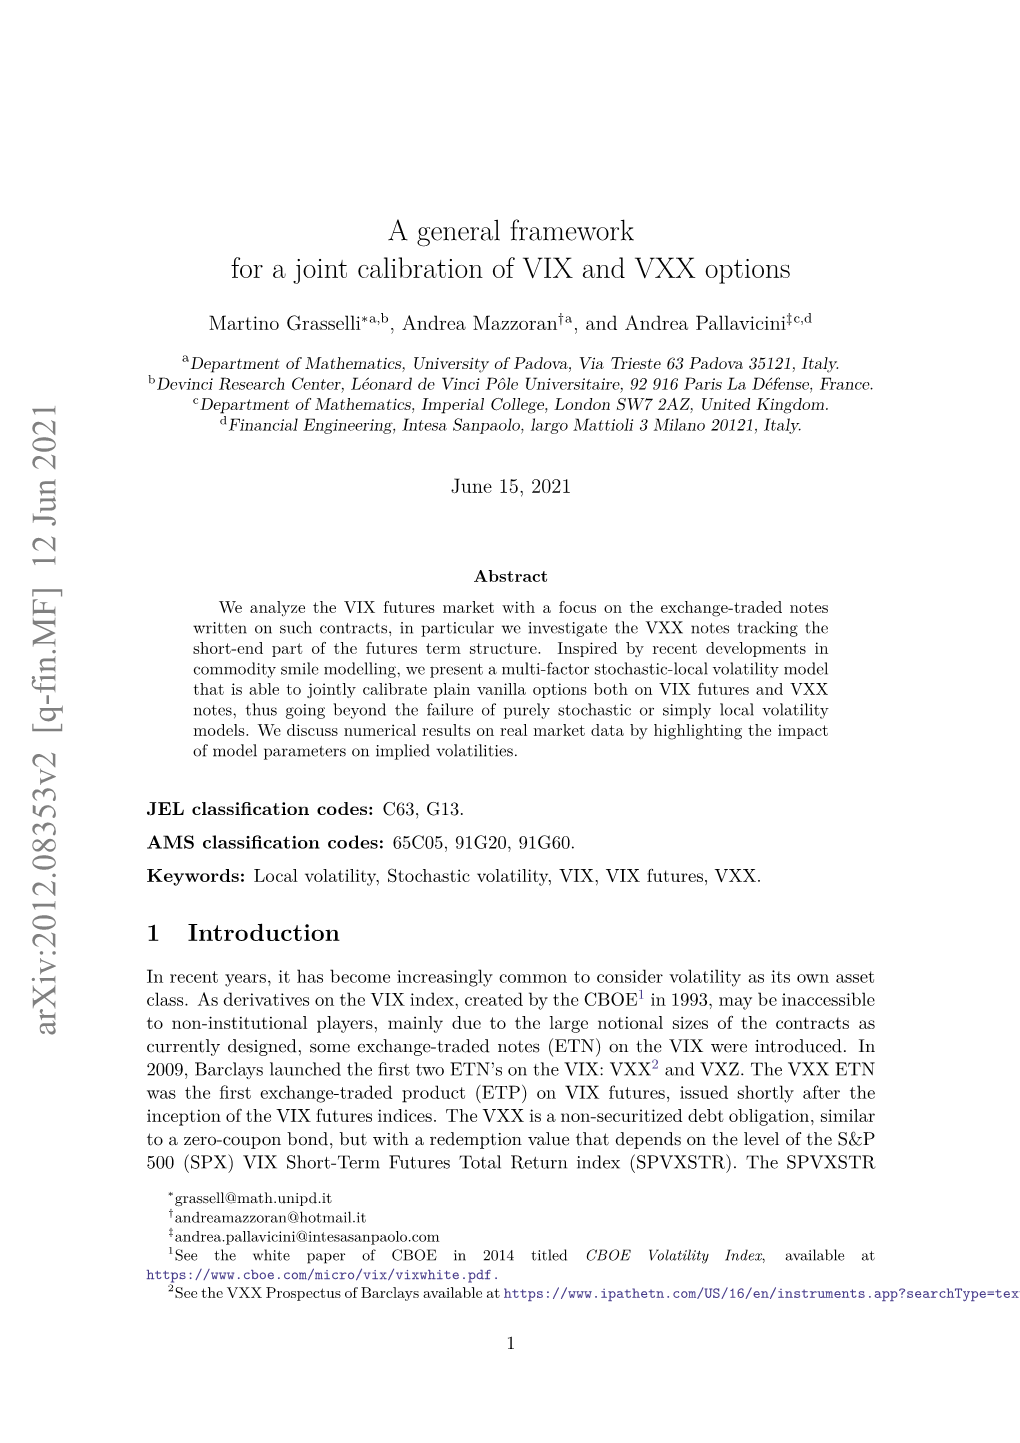 A General Framework for a Joint Calibration of VIX and VXX Options